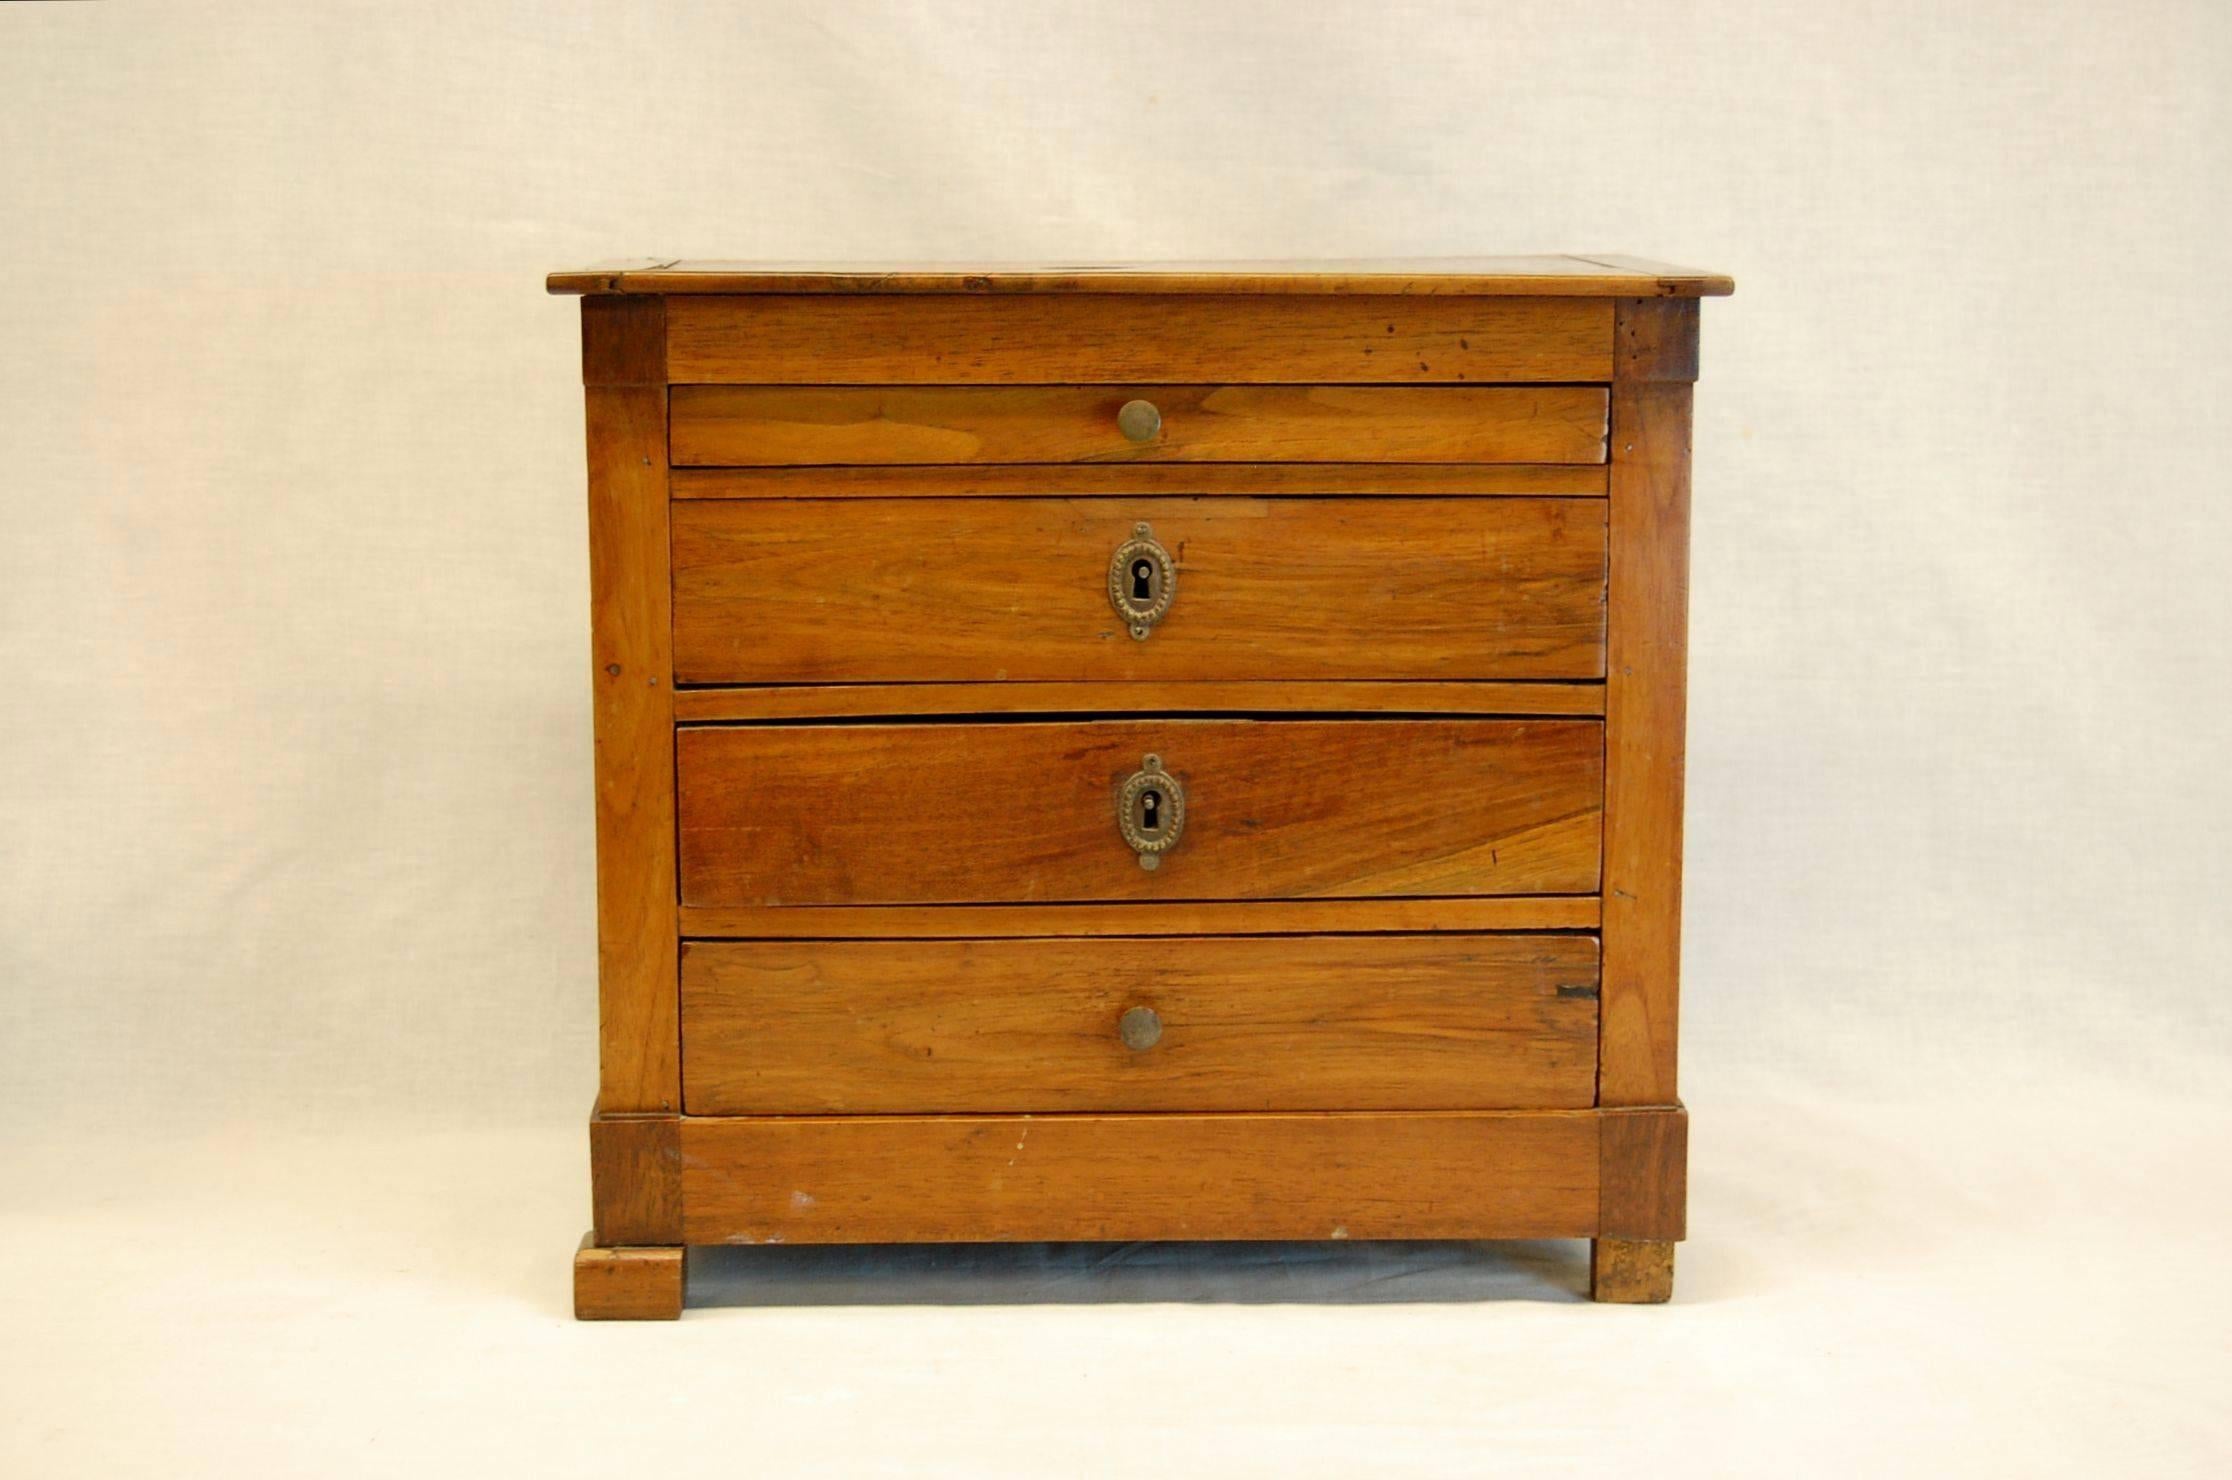 Directoire 19th Century Walnut Directiore Miniature Chest of Drawers